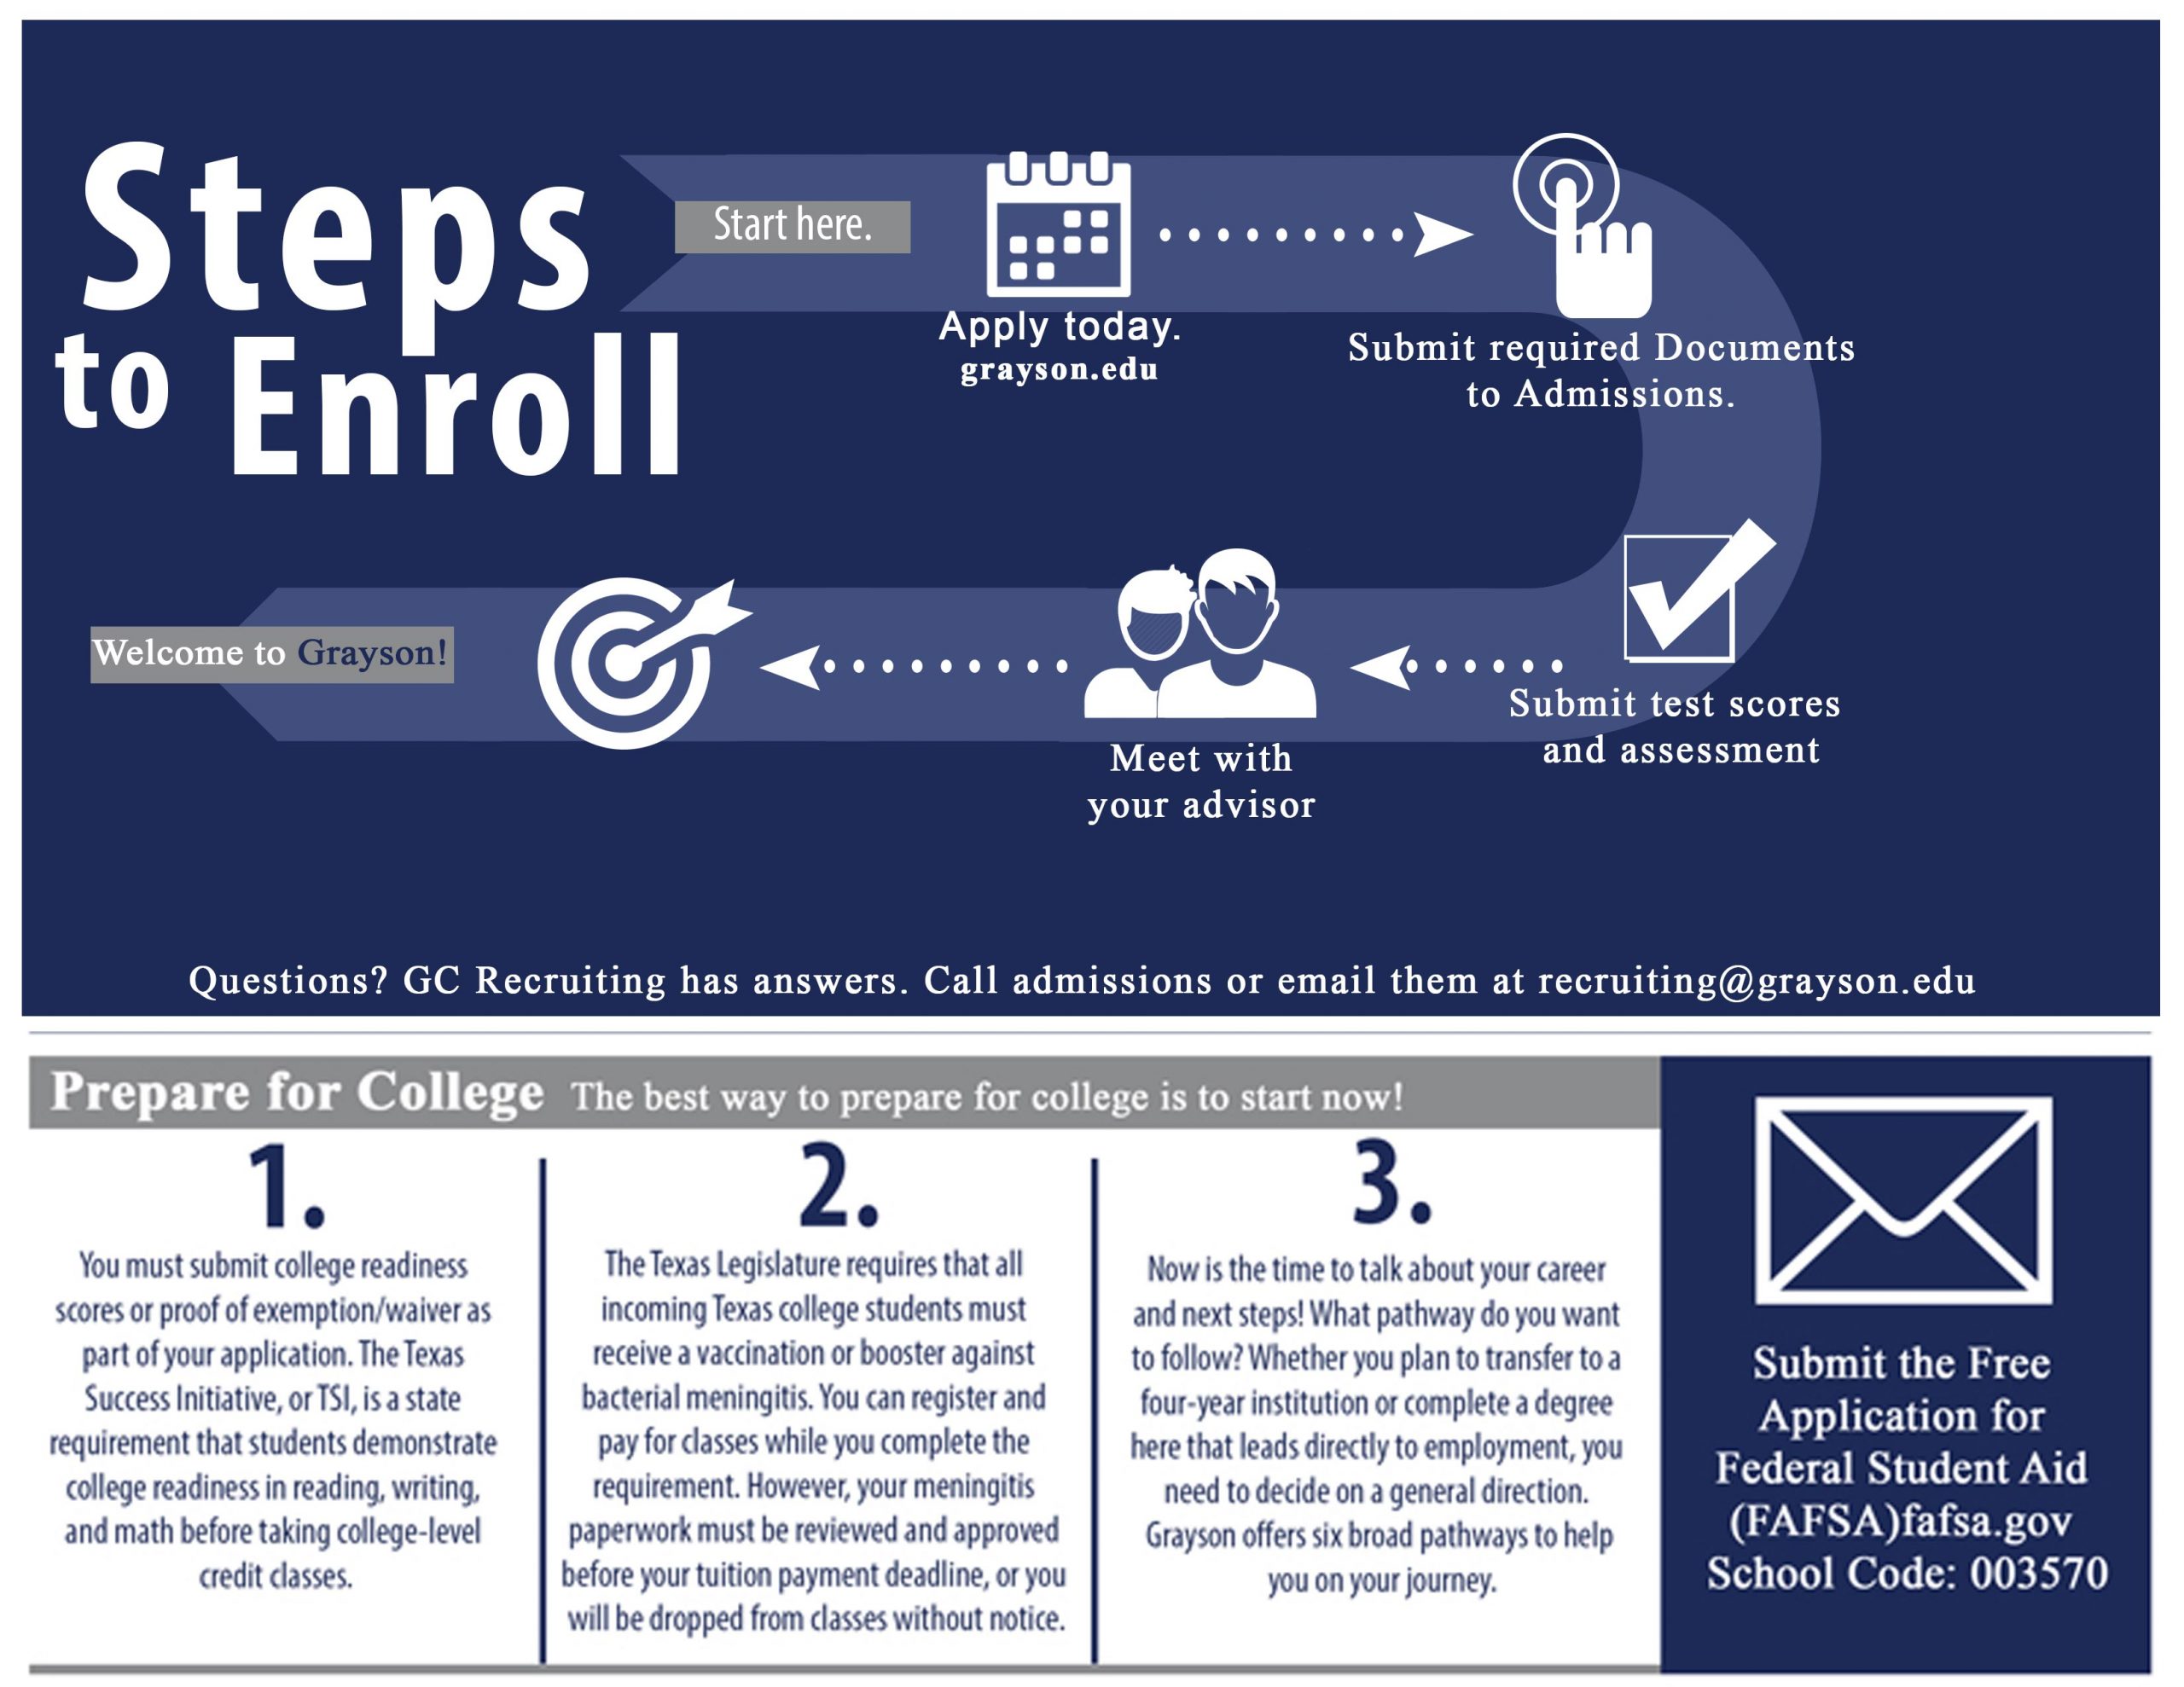 Successfully Navigating the College Admission Process: A Step-by-Step Guide